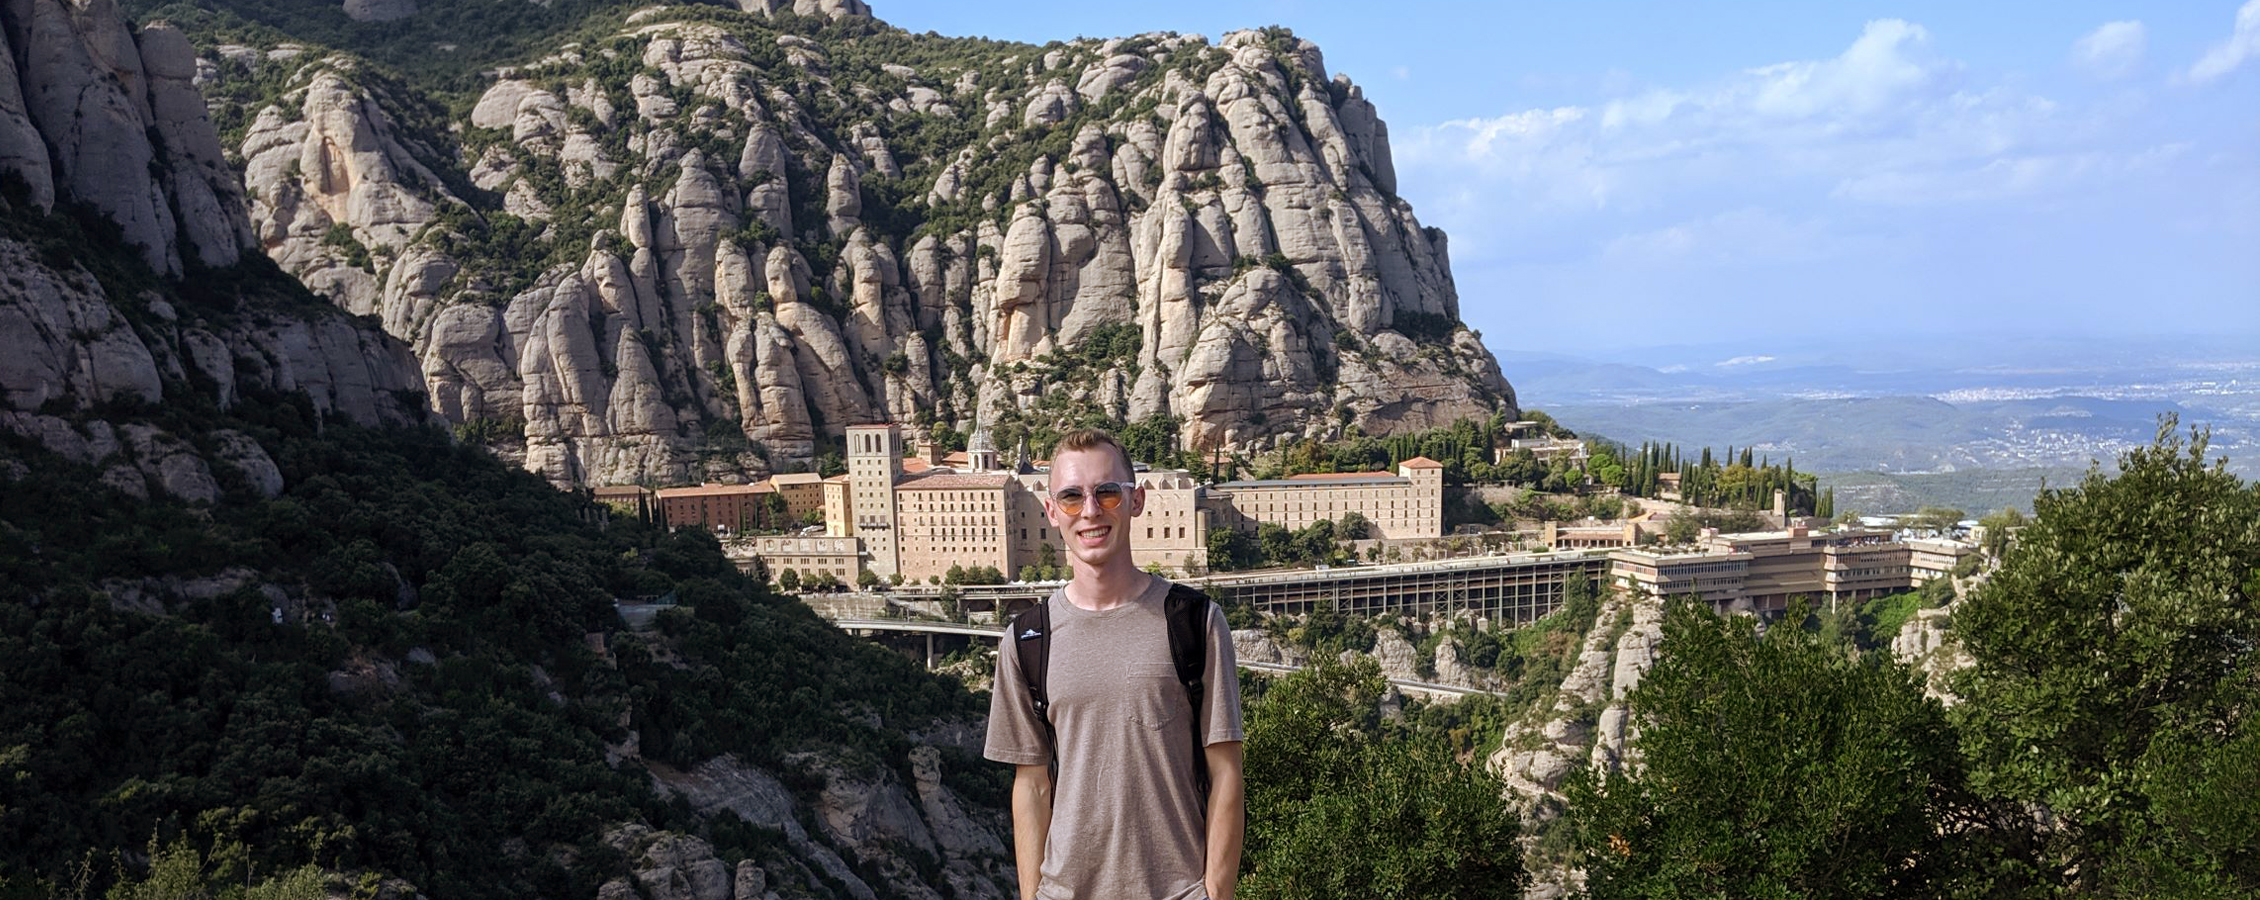 A person poses for a picture in front of a city built into a large mountain.